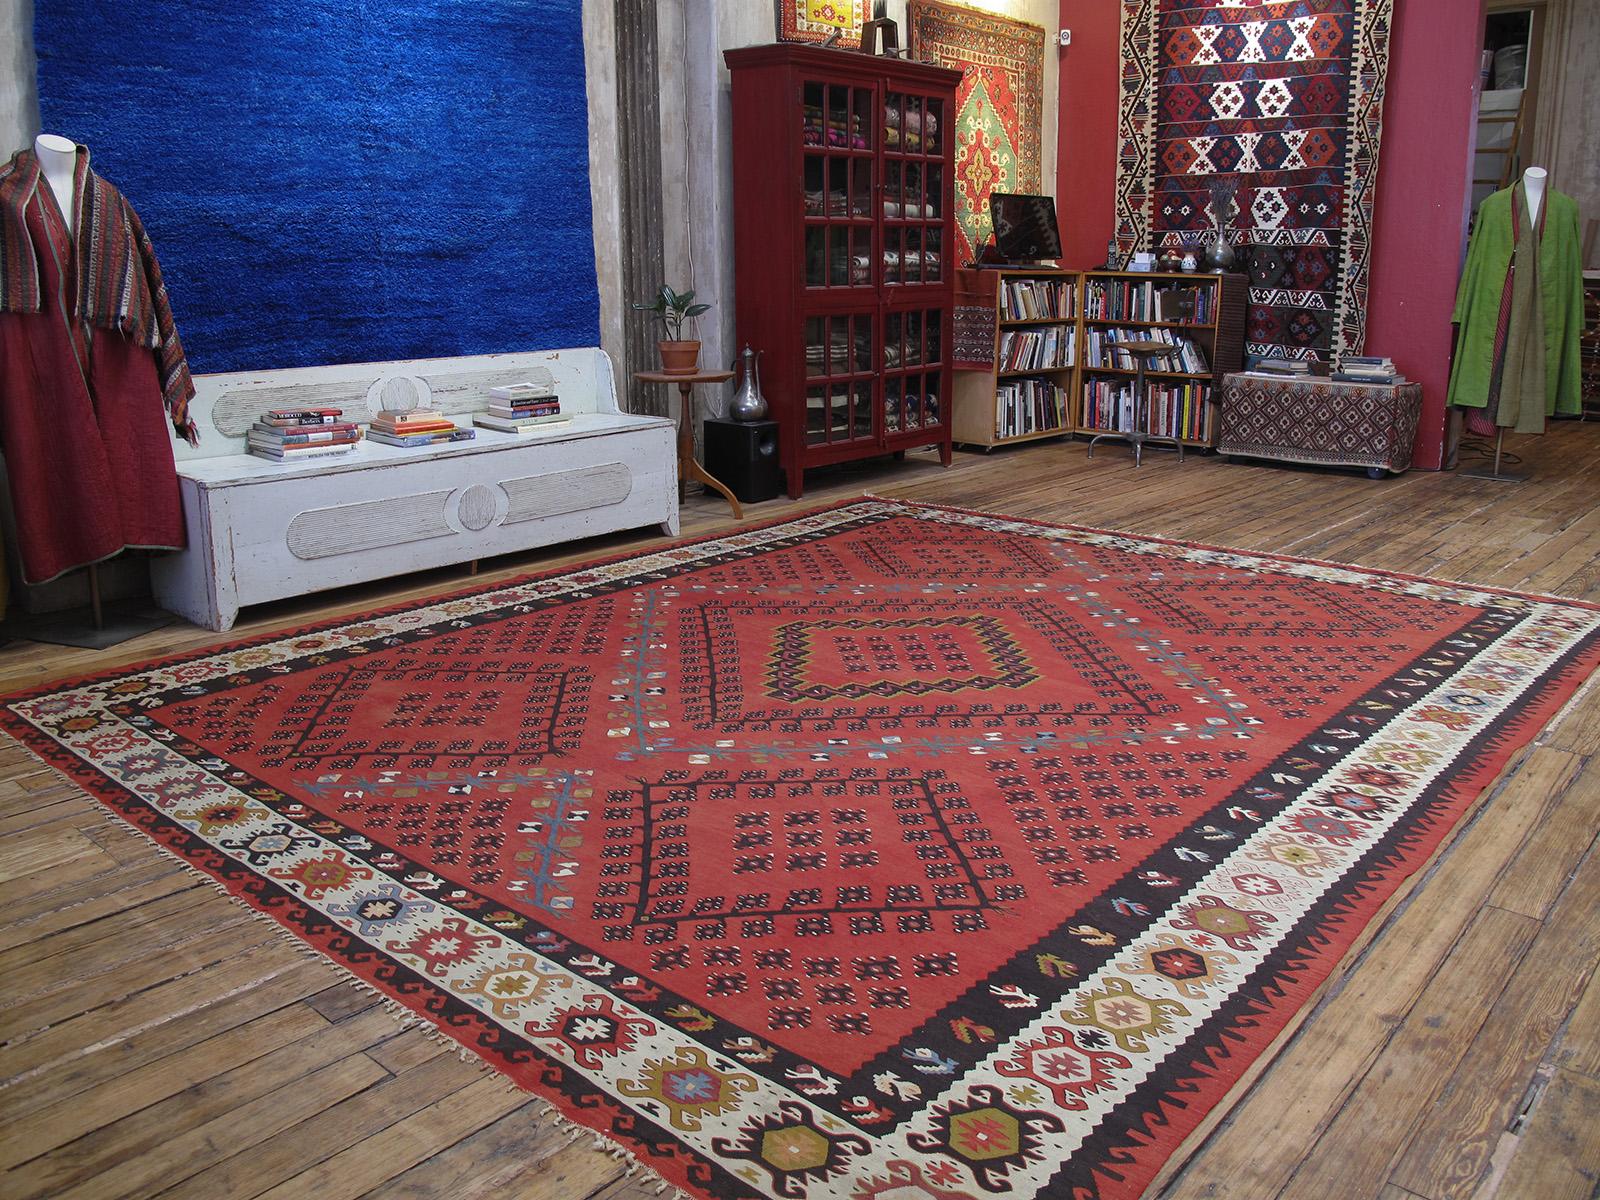 A large kilim from the Balkan peninsula in southeastern Europe. This is a great example from the early part of the 20th century, featuring one of the best-known designs of this type in a very attractive color palette.